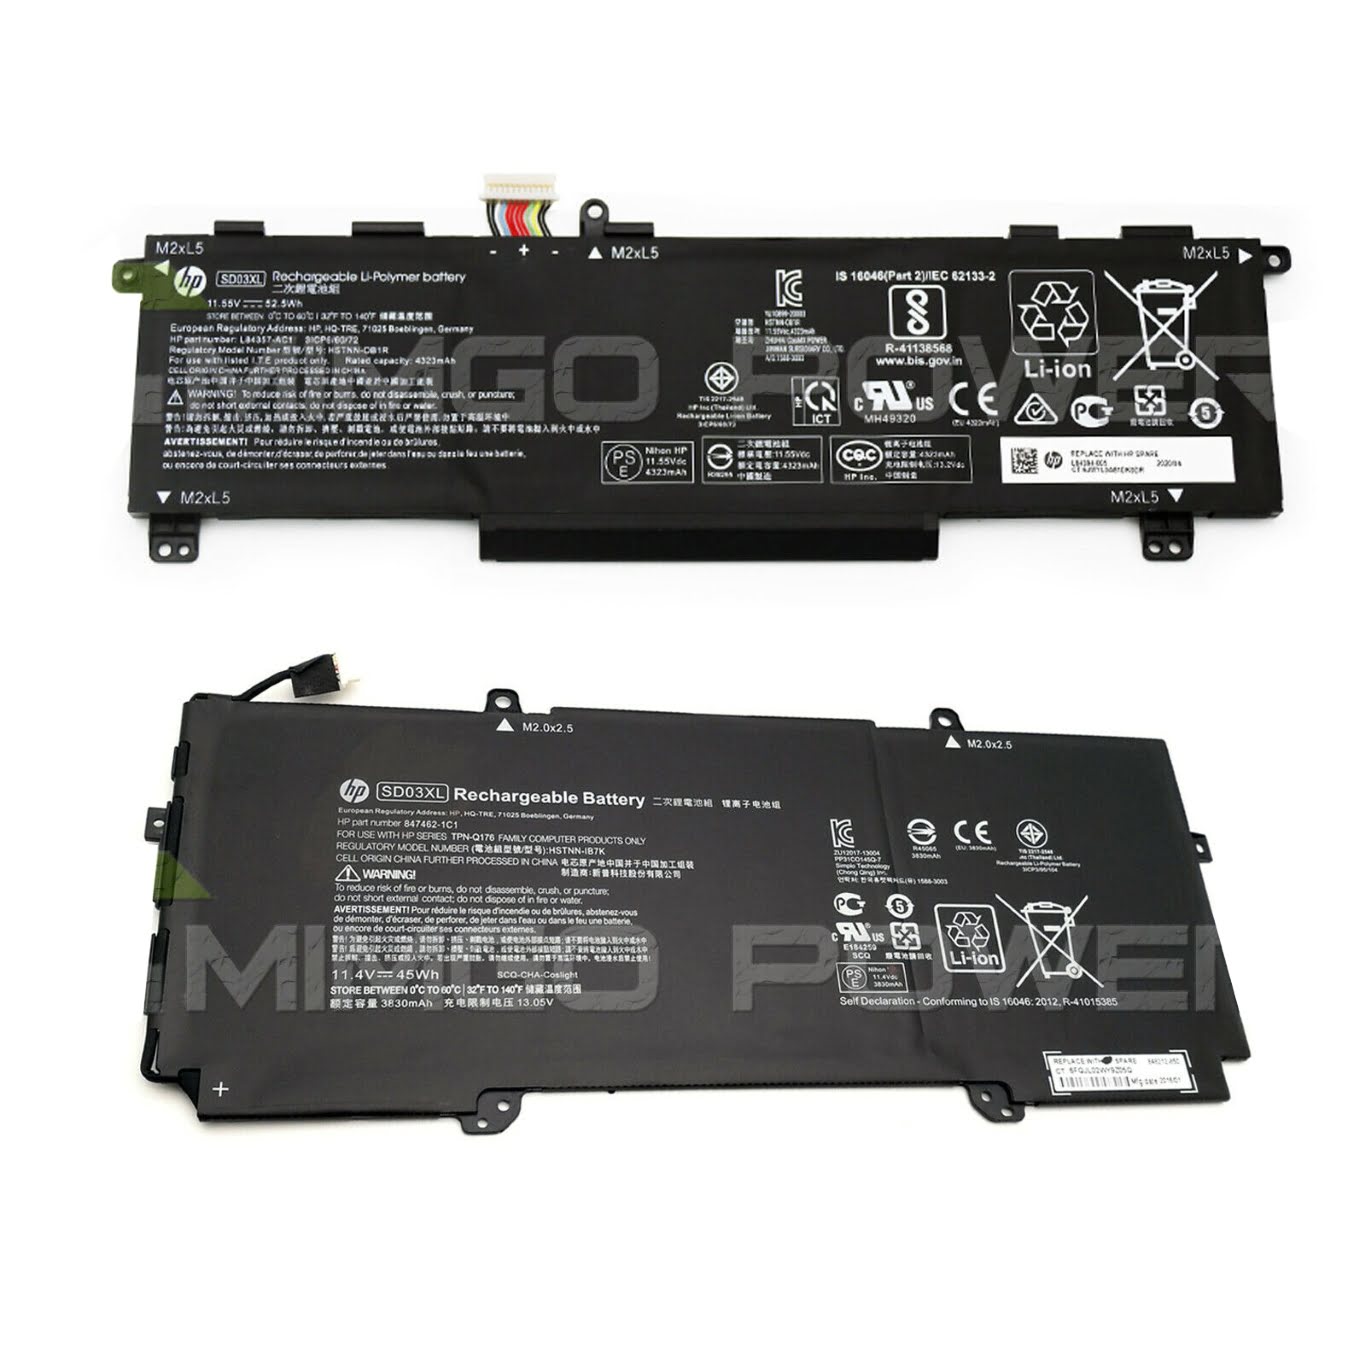 847462-1C1, 848212-850 replacement Laptop Battery for HP Chromebook 13 G1, Chromebook 13 G1 Core M5, 52.5wh / 45wh, 11.55v / 11.4v